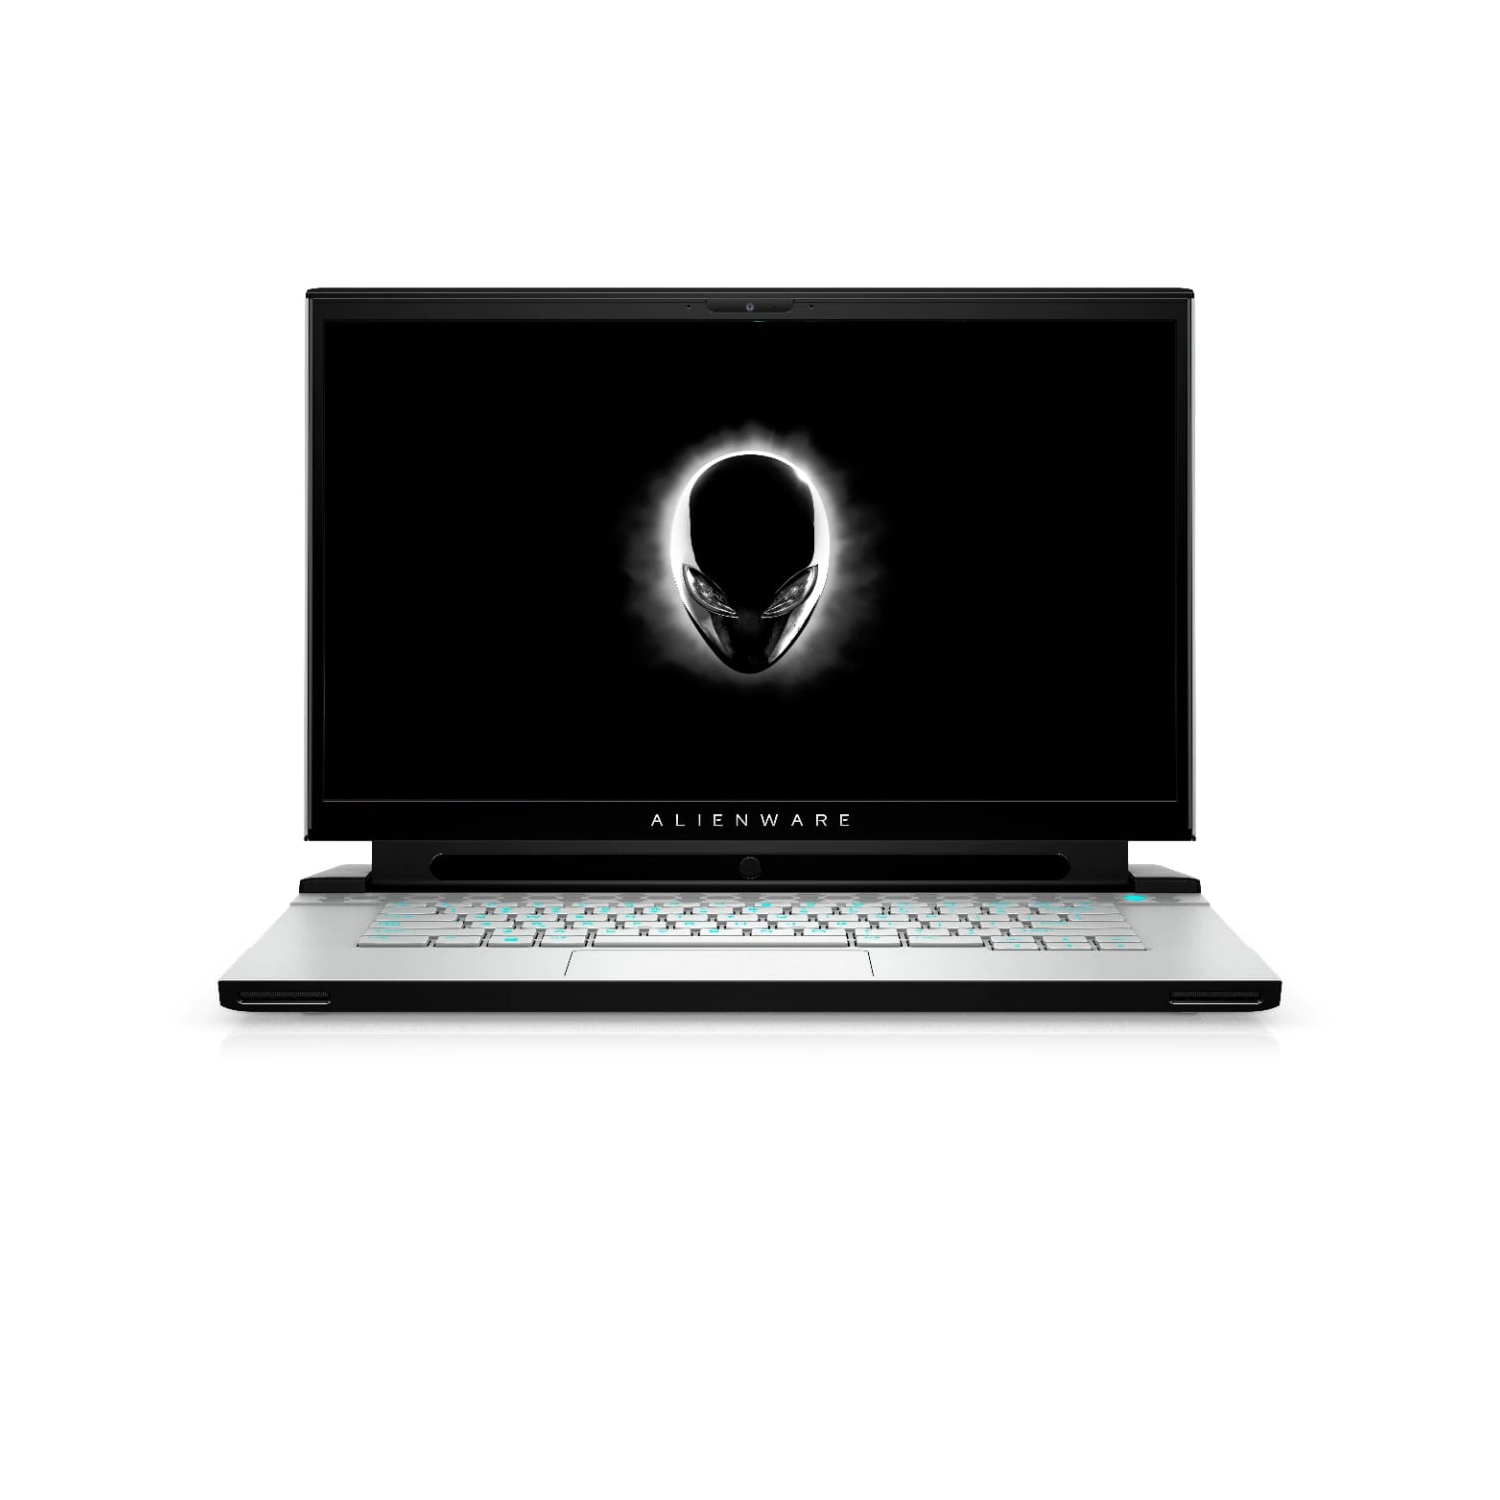 Refurbished (Excellent) - Dell Alienware m15 R3 Gaming Laptop (2020), 15.6" FHD, Core i7, 512GB SSD + 512GB SSD, 16GB RAM, RTX 2060, 5 GHz, 10th Gen CPU Certified